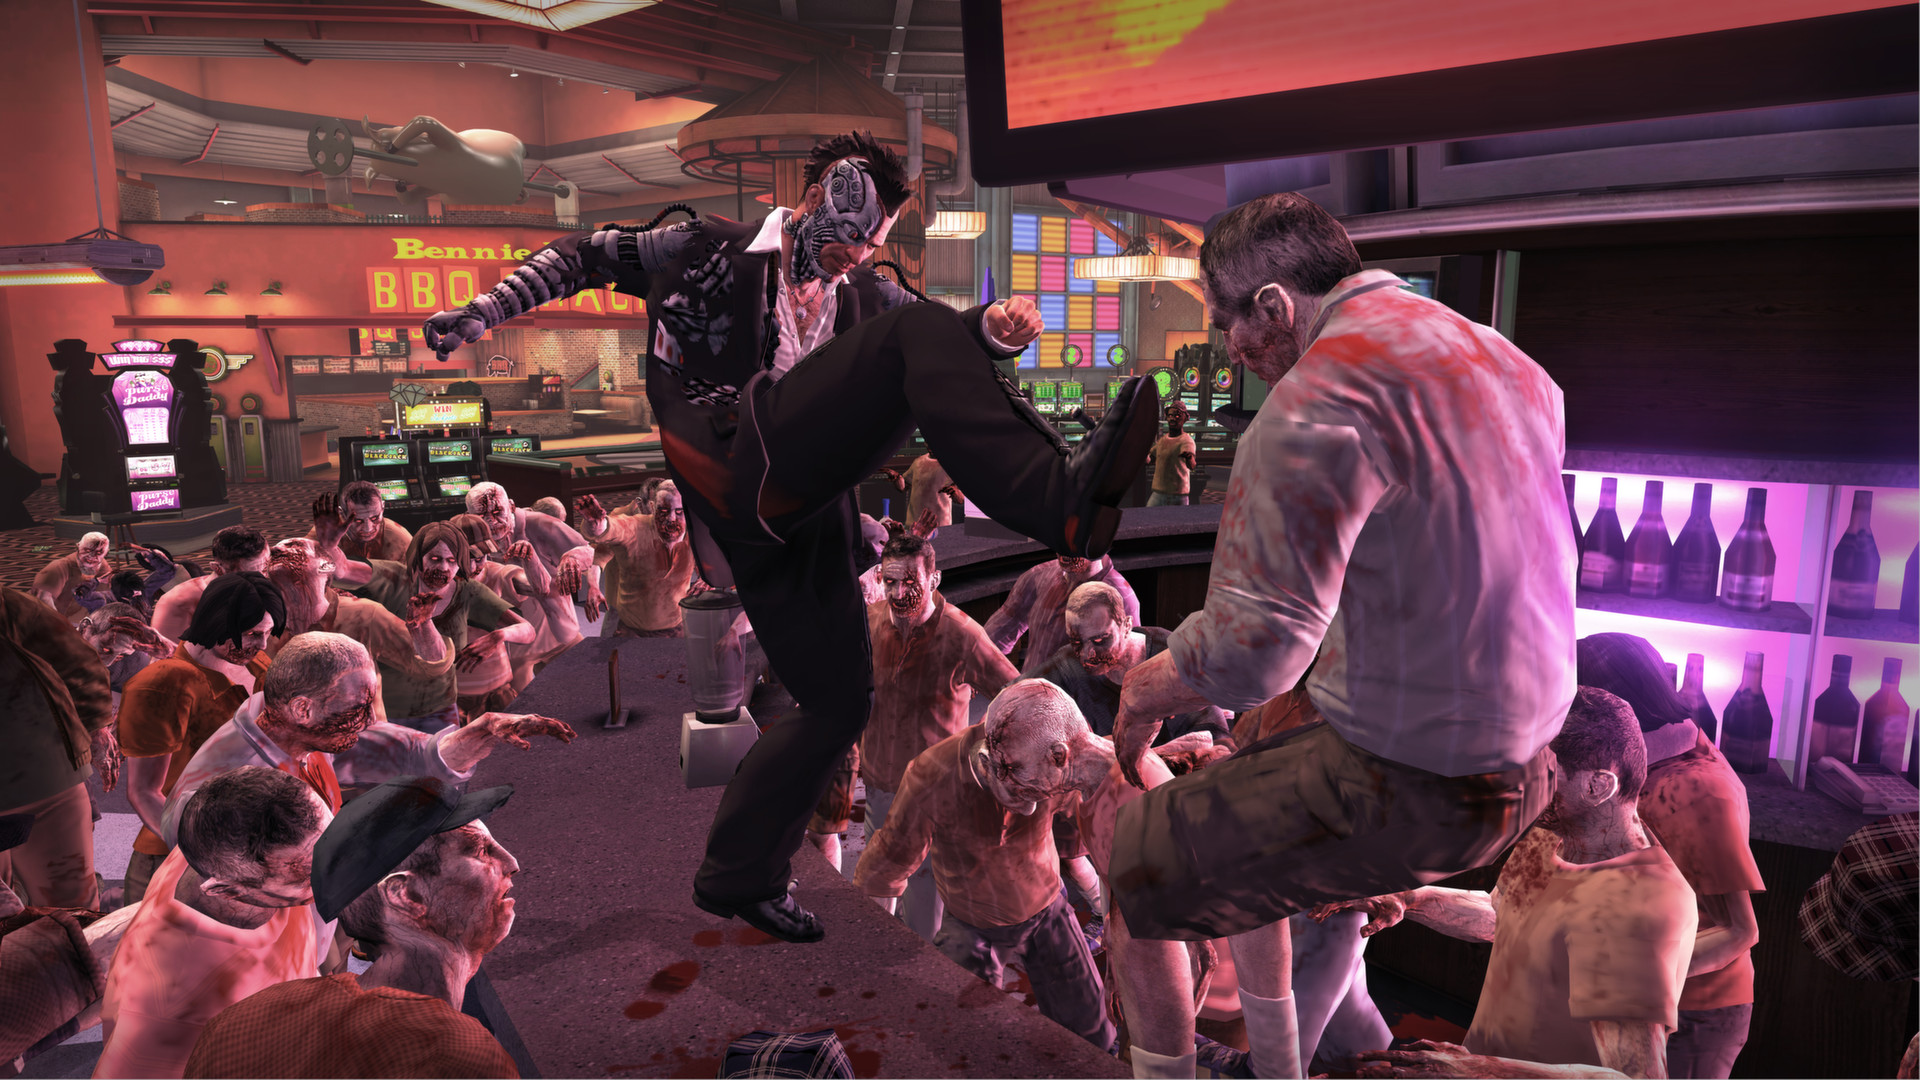 Dead Rising 2: Off the Record – review, Shooting games